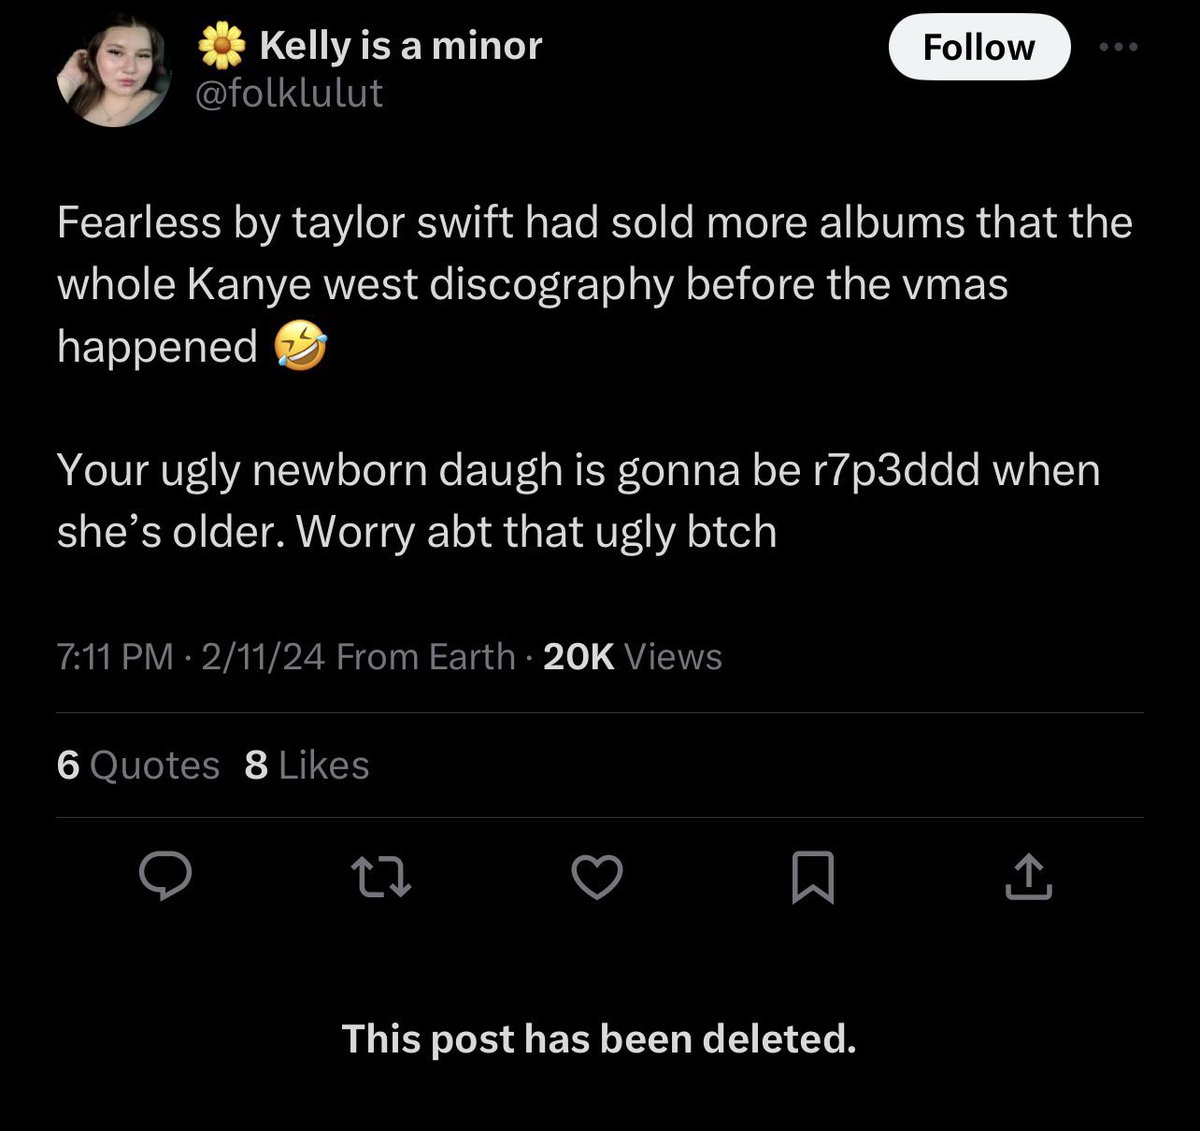 Taylor Swift fans are making r*pe threats and telling a pregnant woman she is going to have a miscarriage. This is beyond gross…